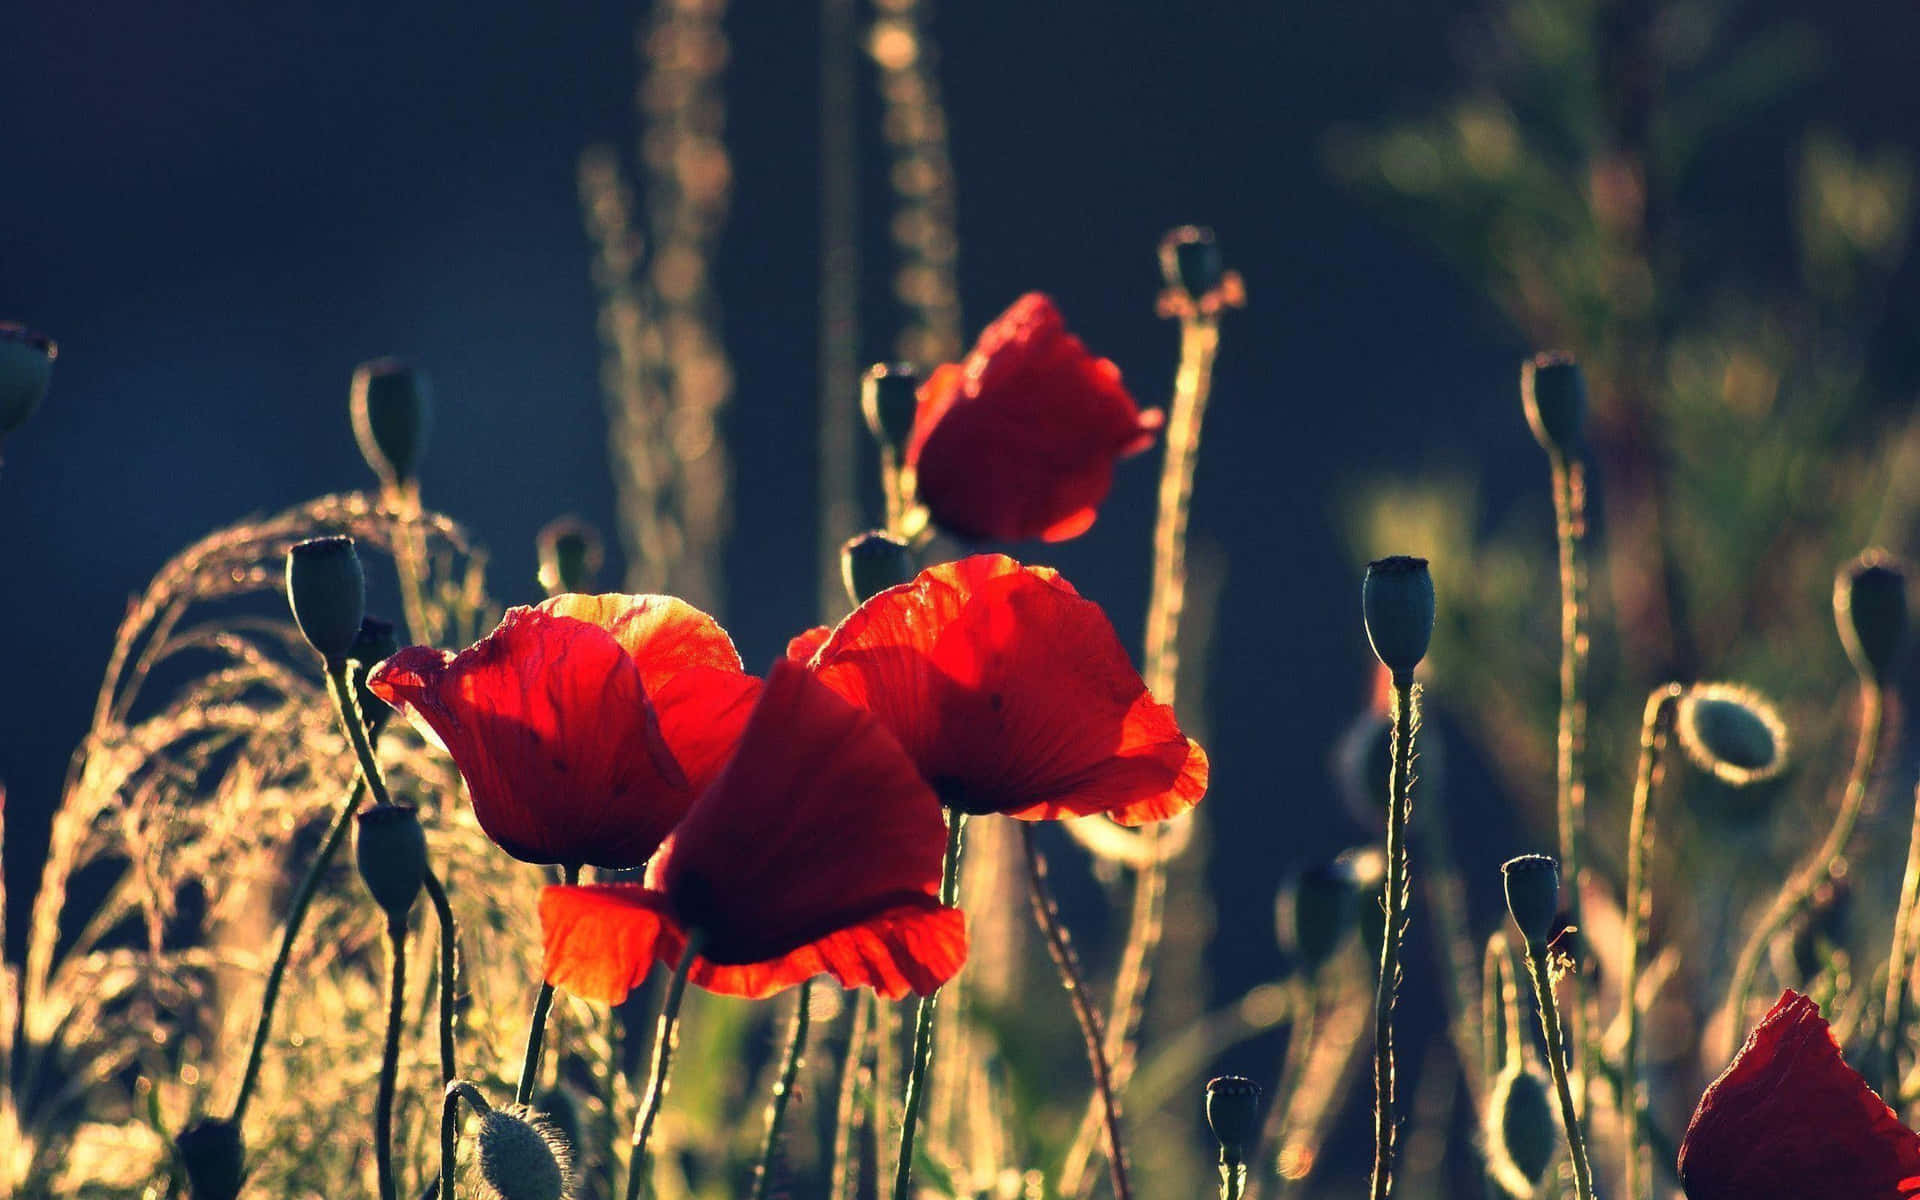 Brighten up your day with a beautiful poppy flower